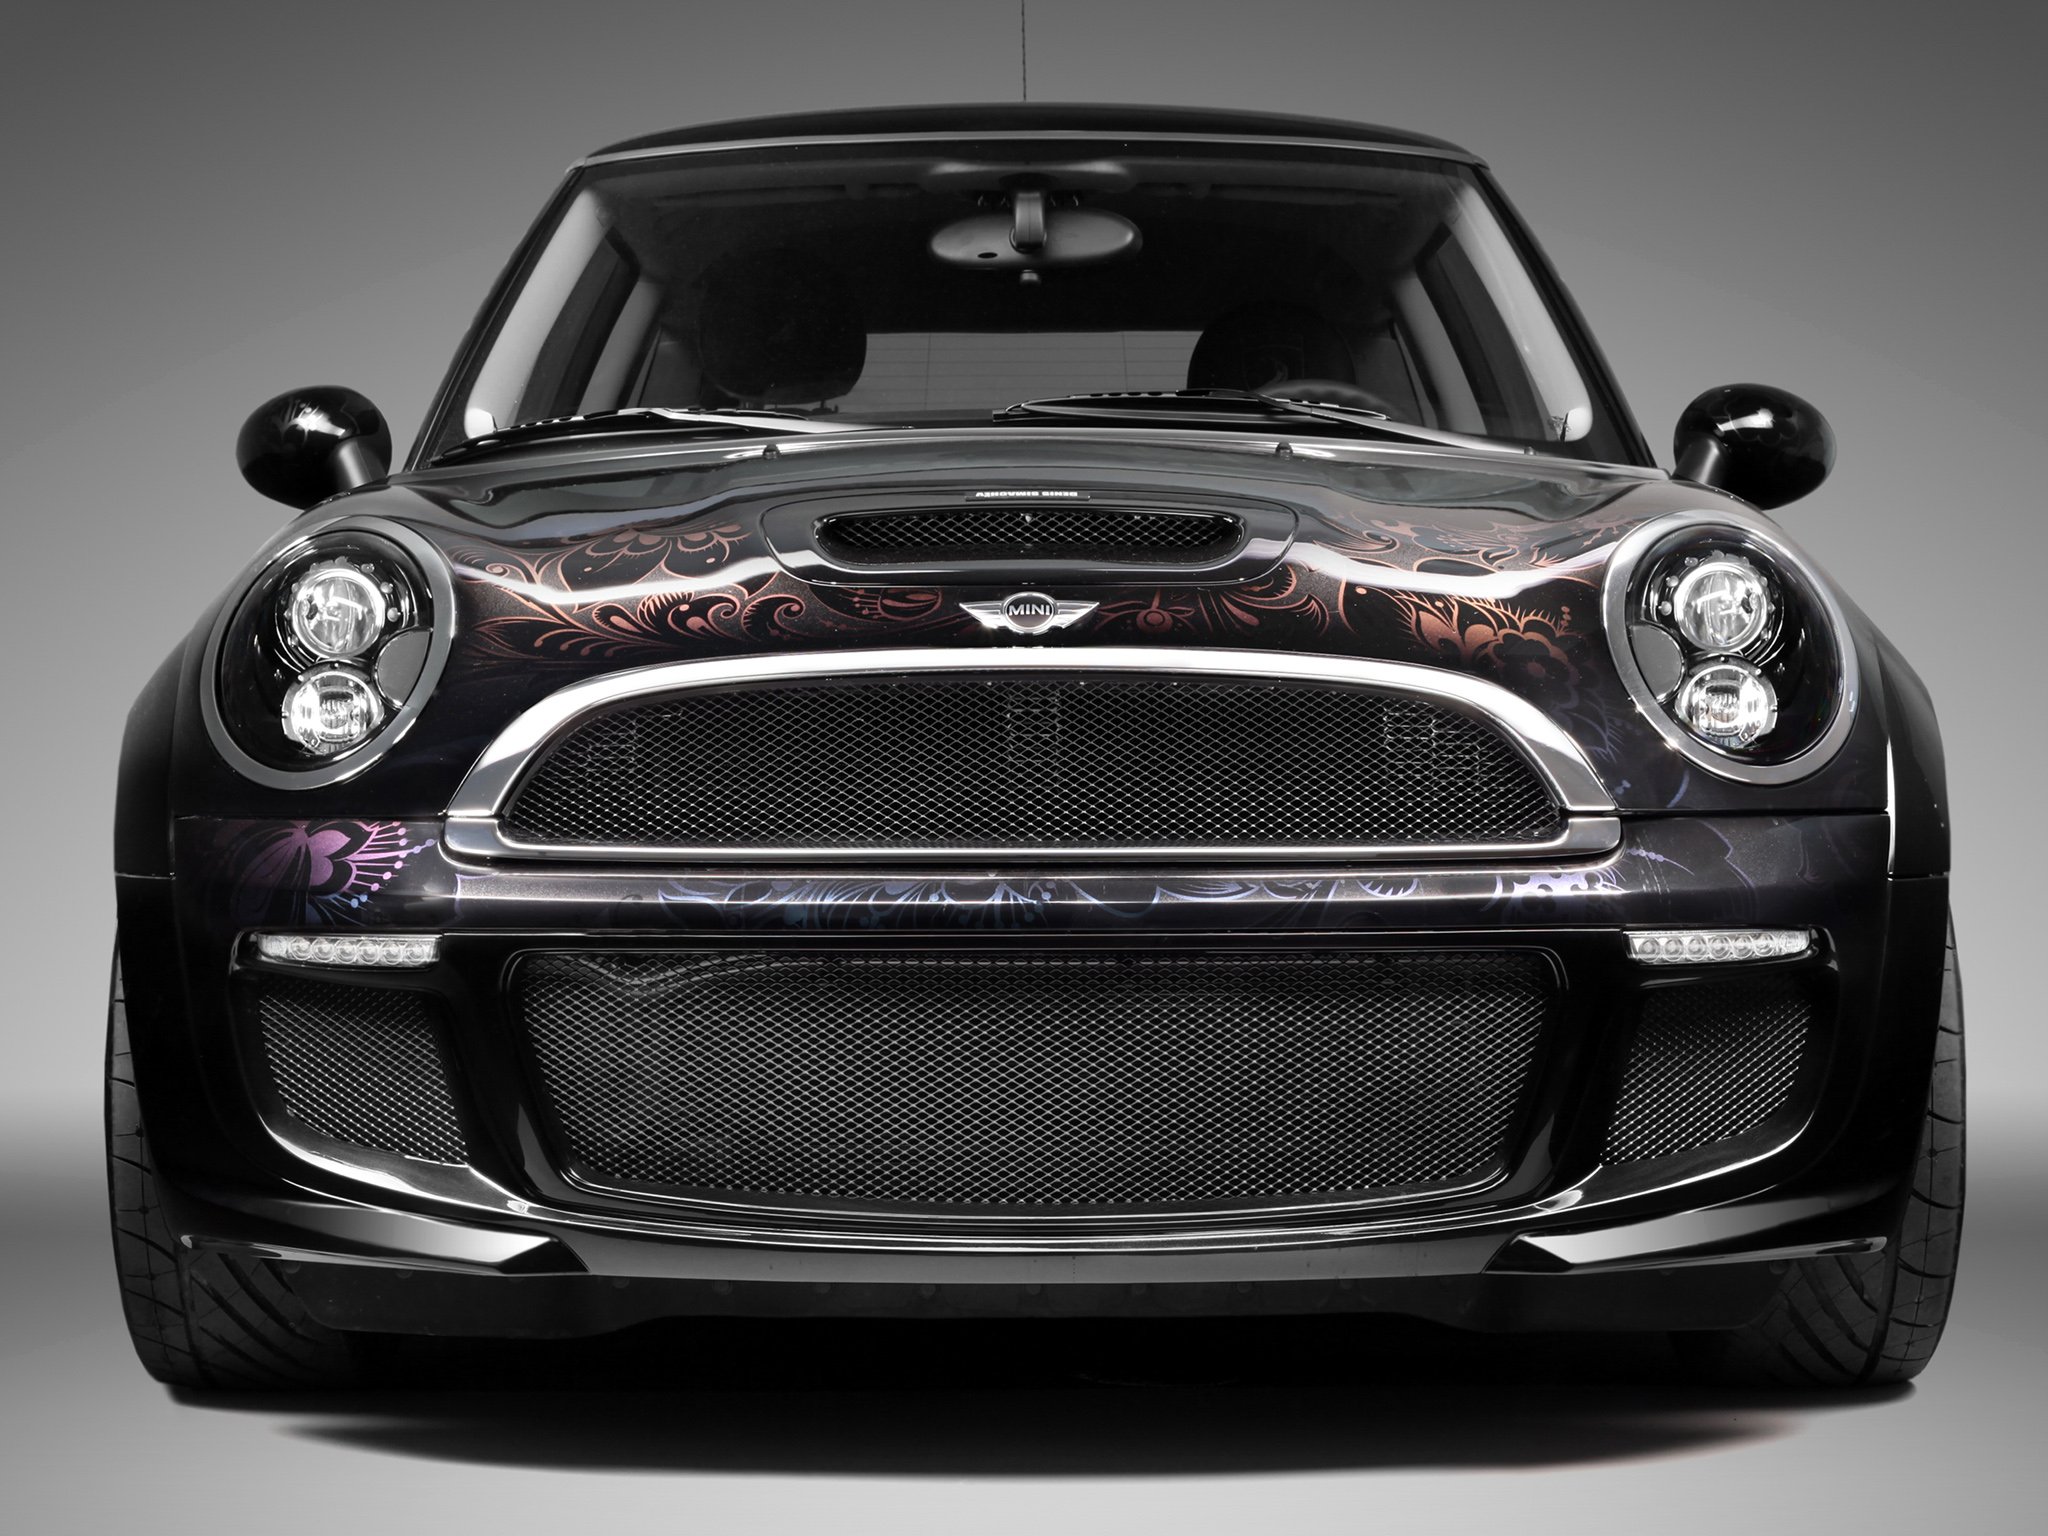 topcar, Mini, Cooper s, Bully, Moscow, Cars, Modified Wallpaper